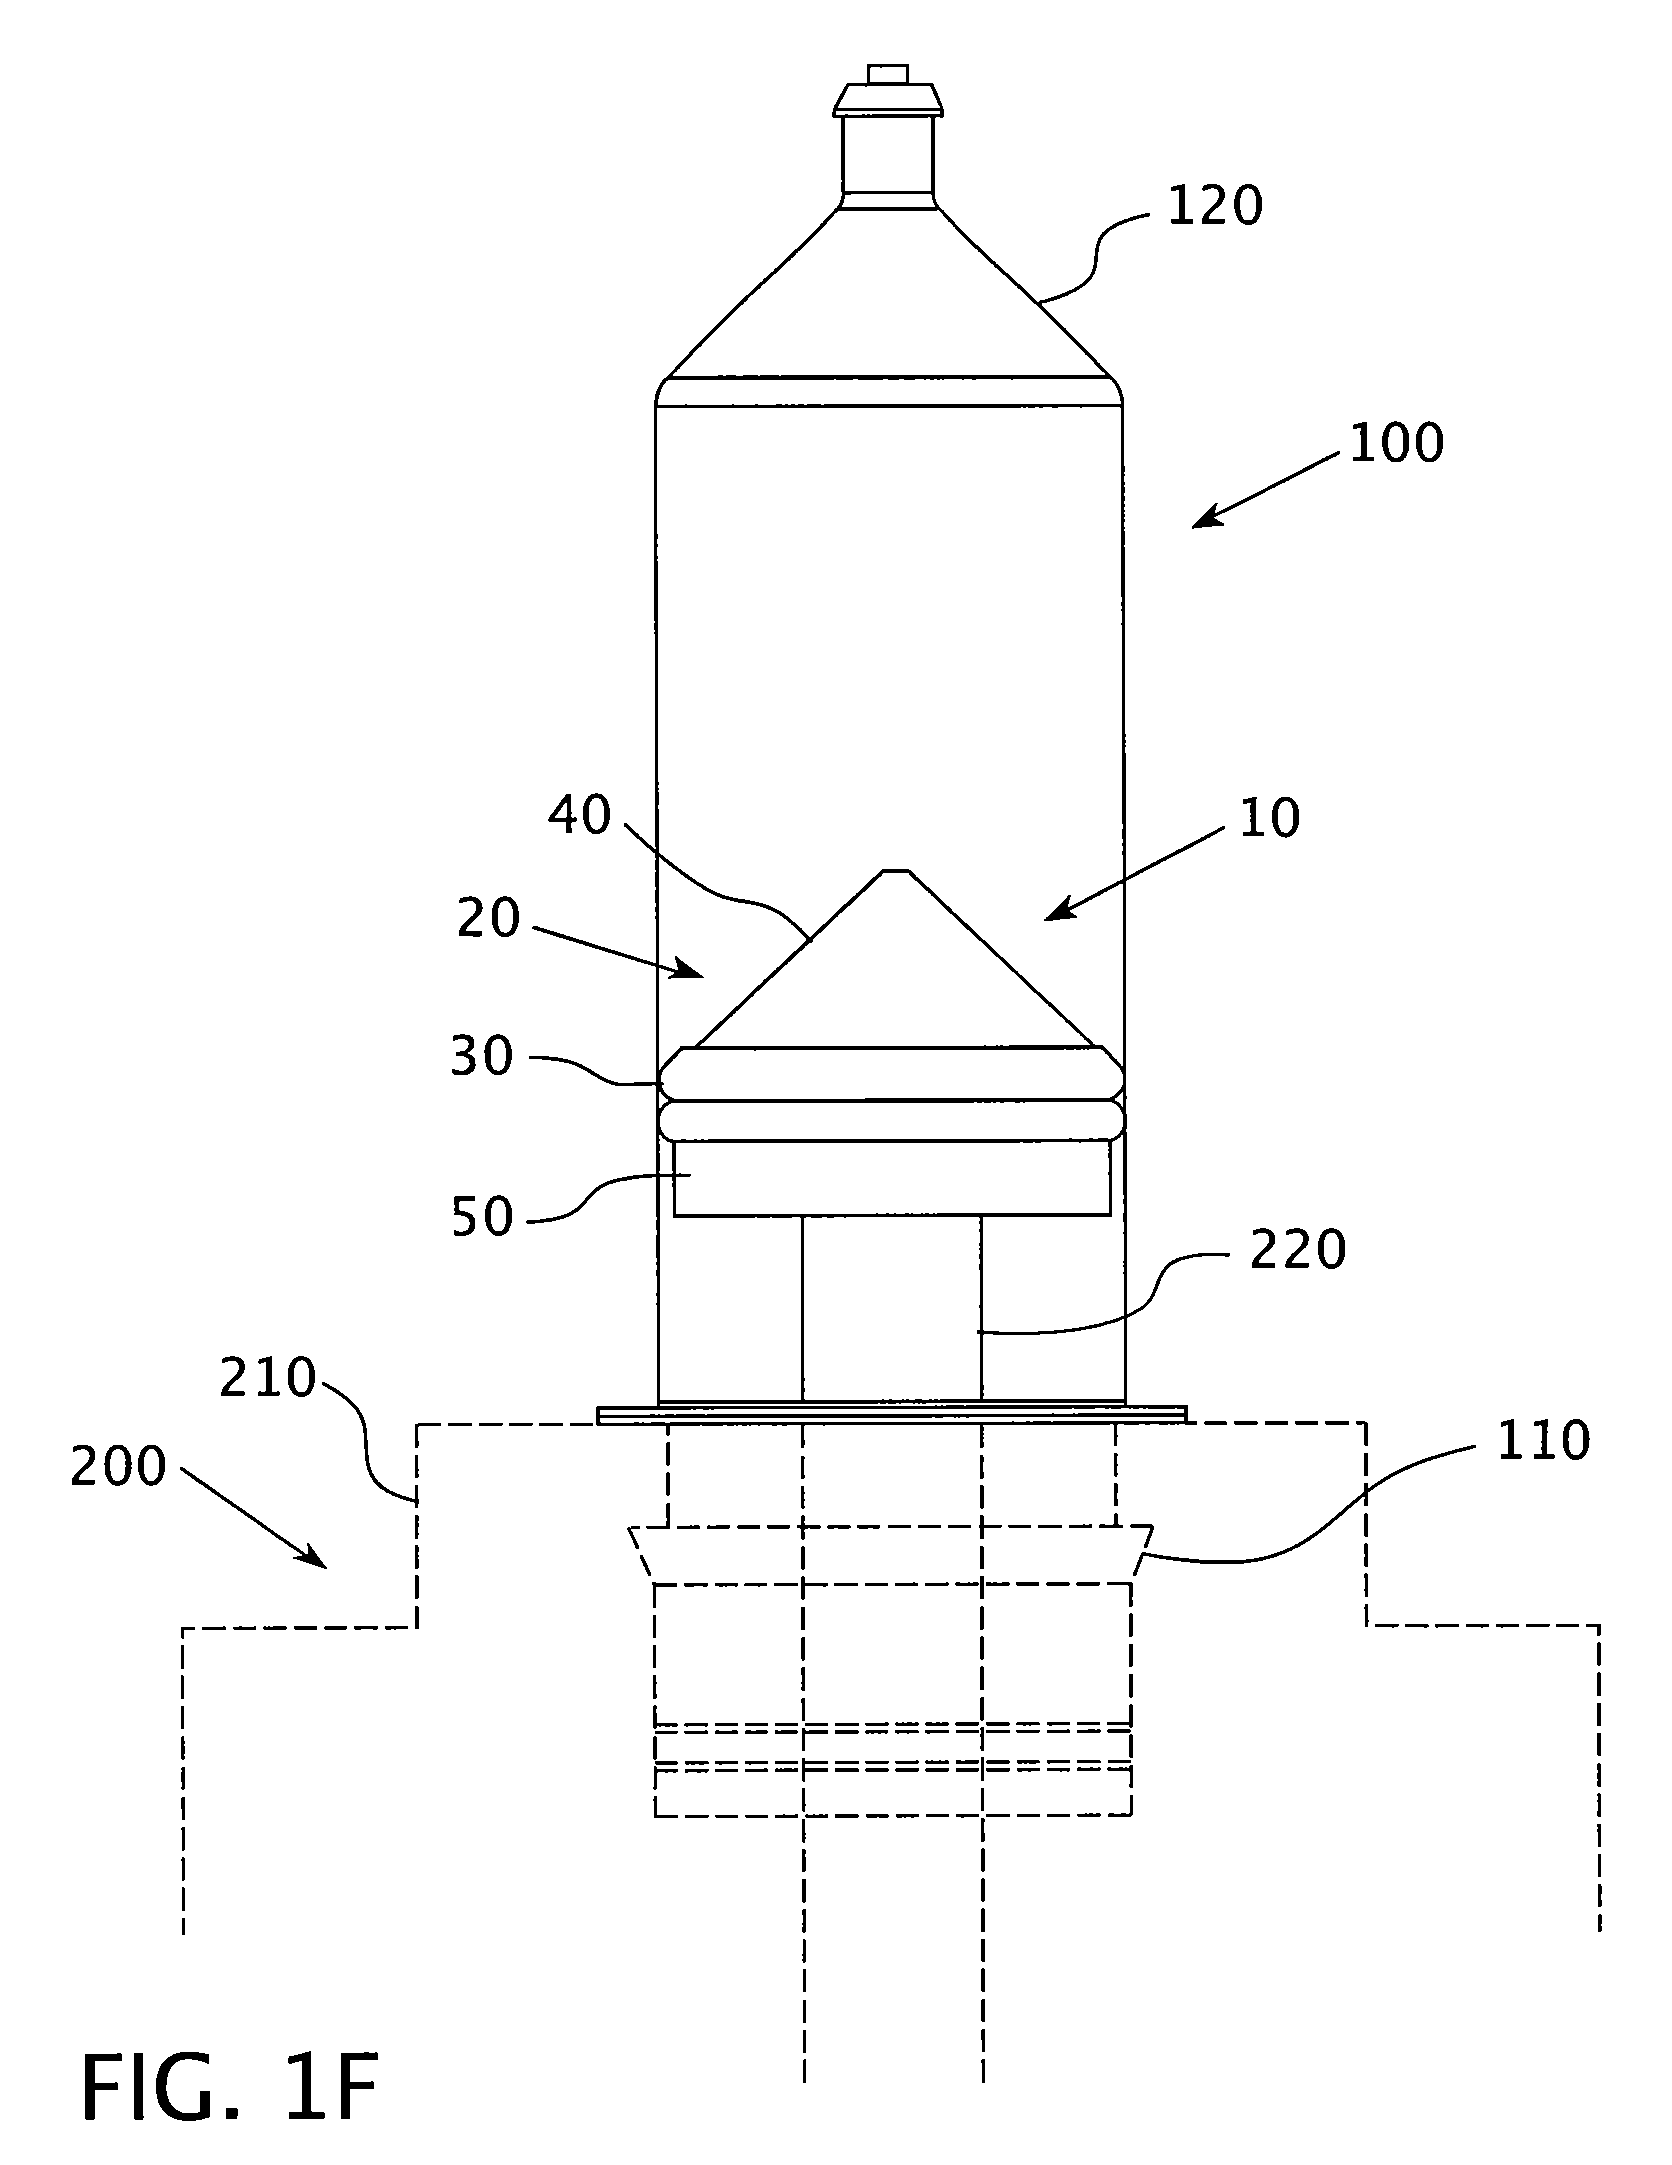 Plunger Covers and Plungers for Use in Syringes and Methods of Fabricating Plunger Covers and Plungers for Use in Syringes